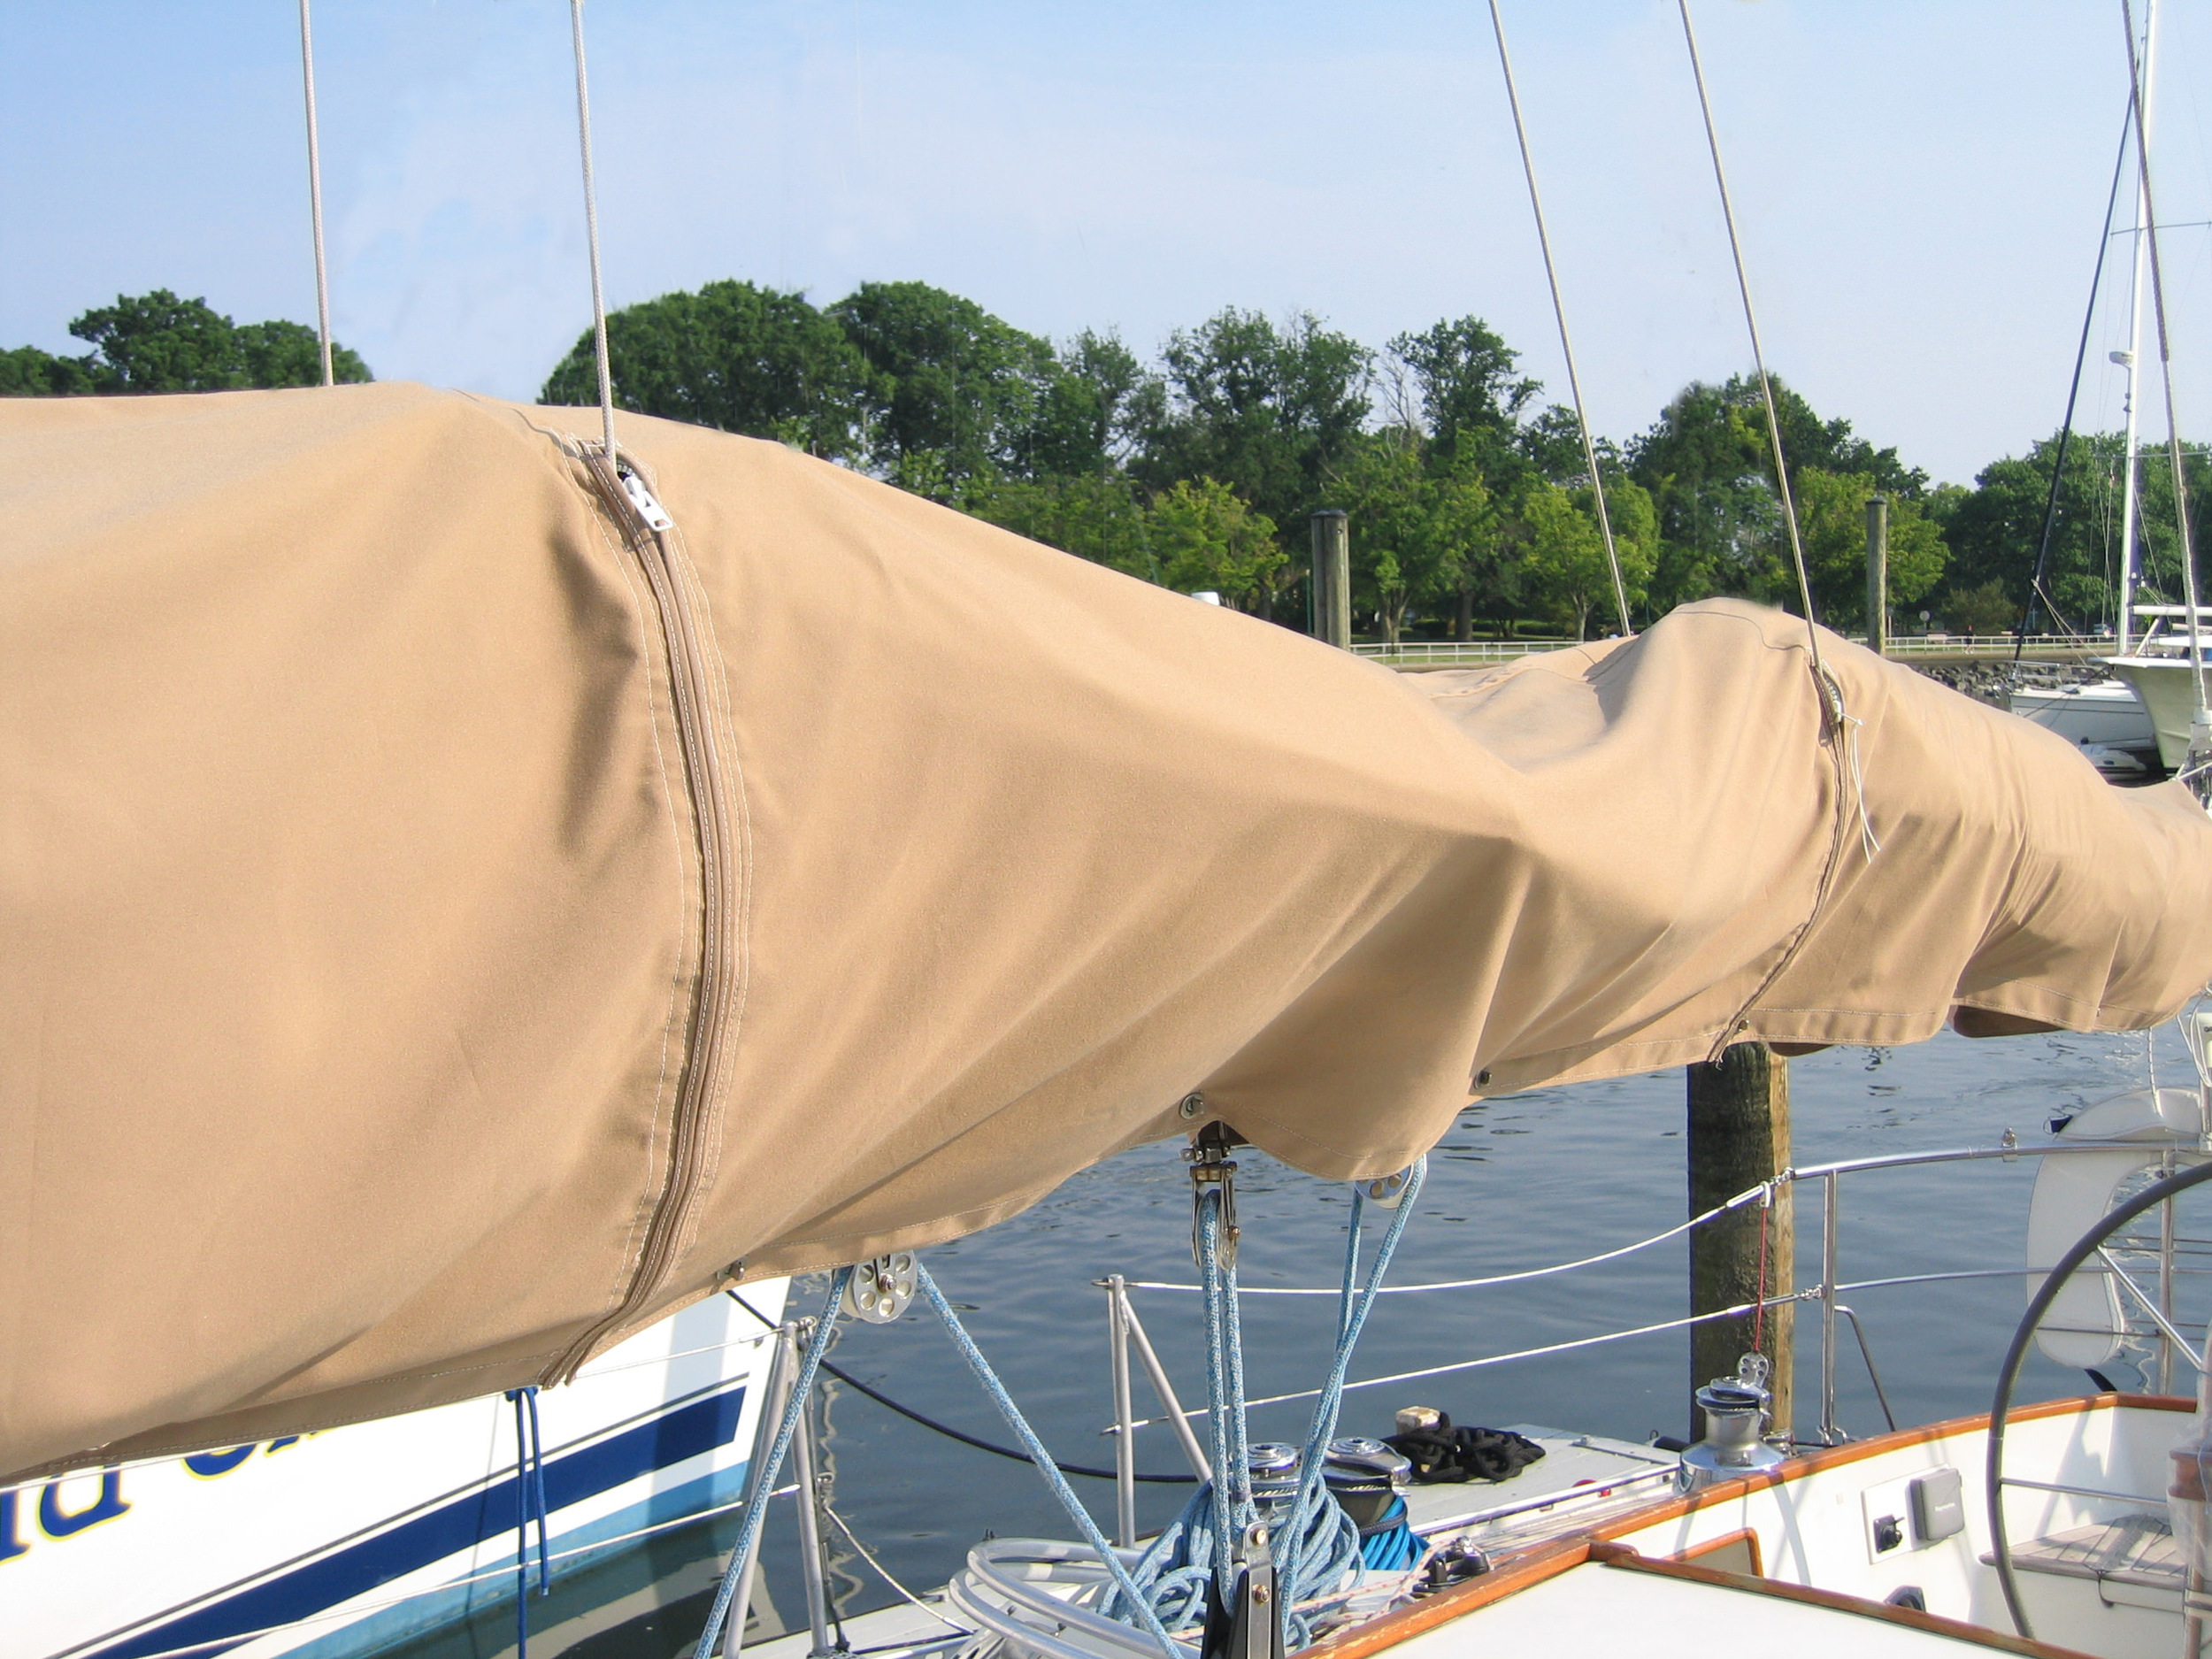 Sail covers need zipper slits to go around lazy jacks when the lazy jacks are left deployed.